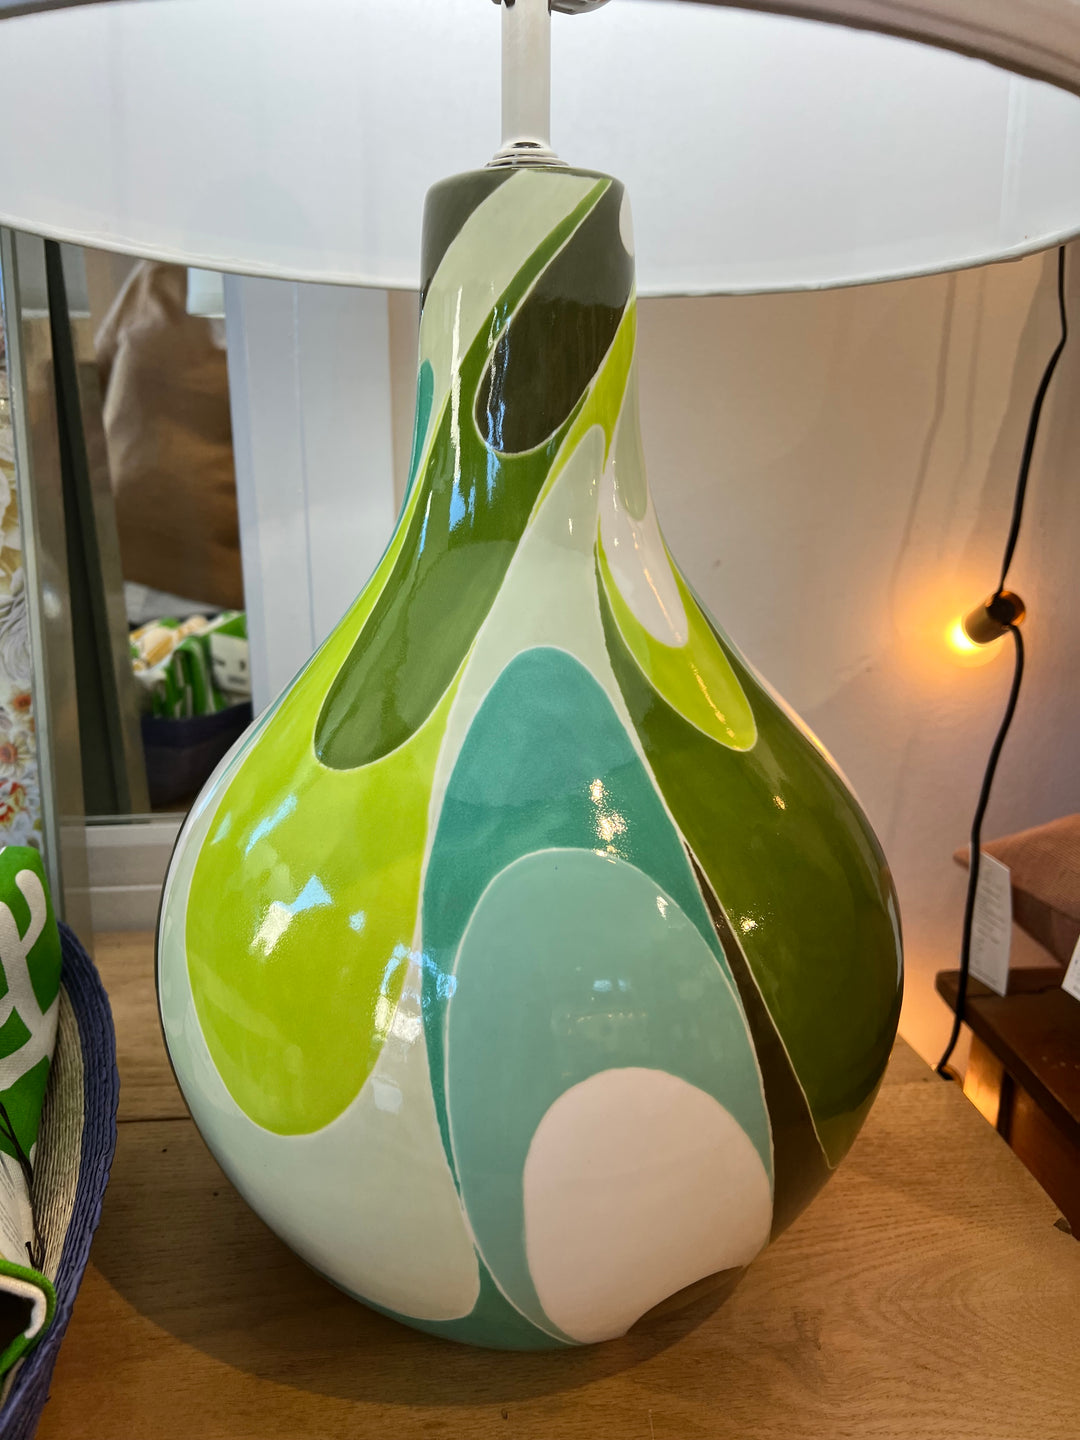 A large ceramic lamp with hand painted blue, green and white swirls.